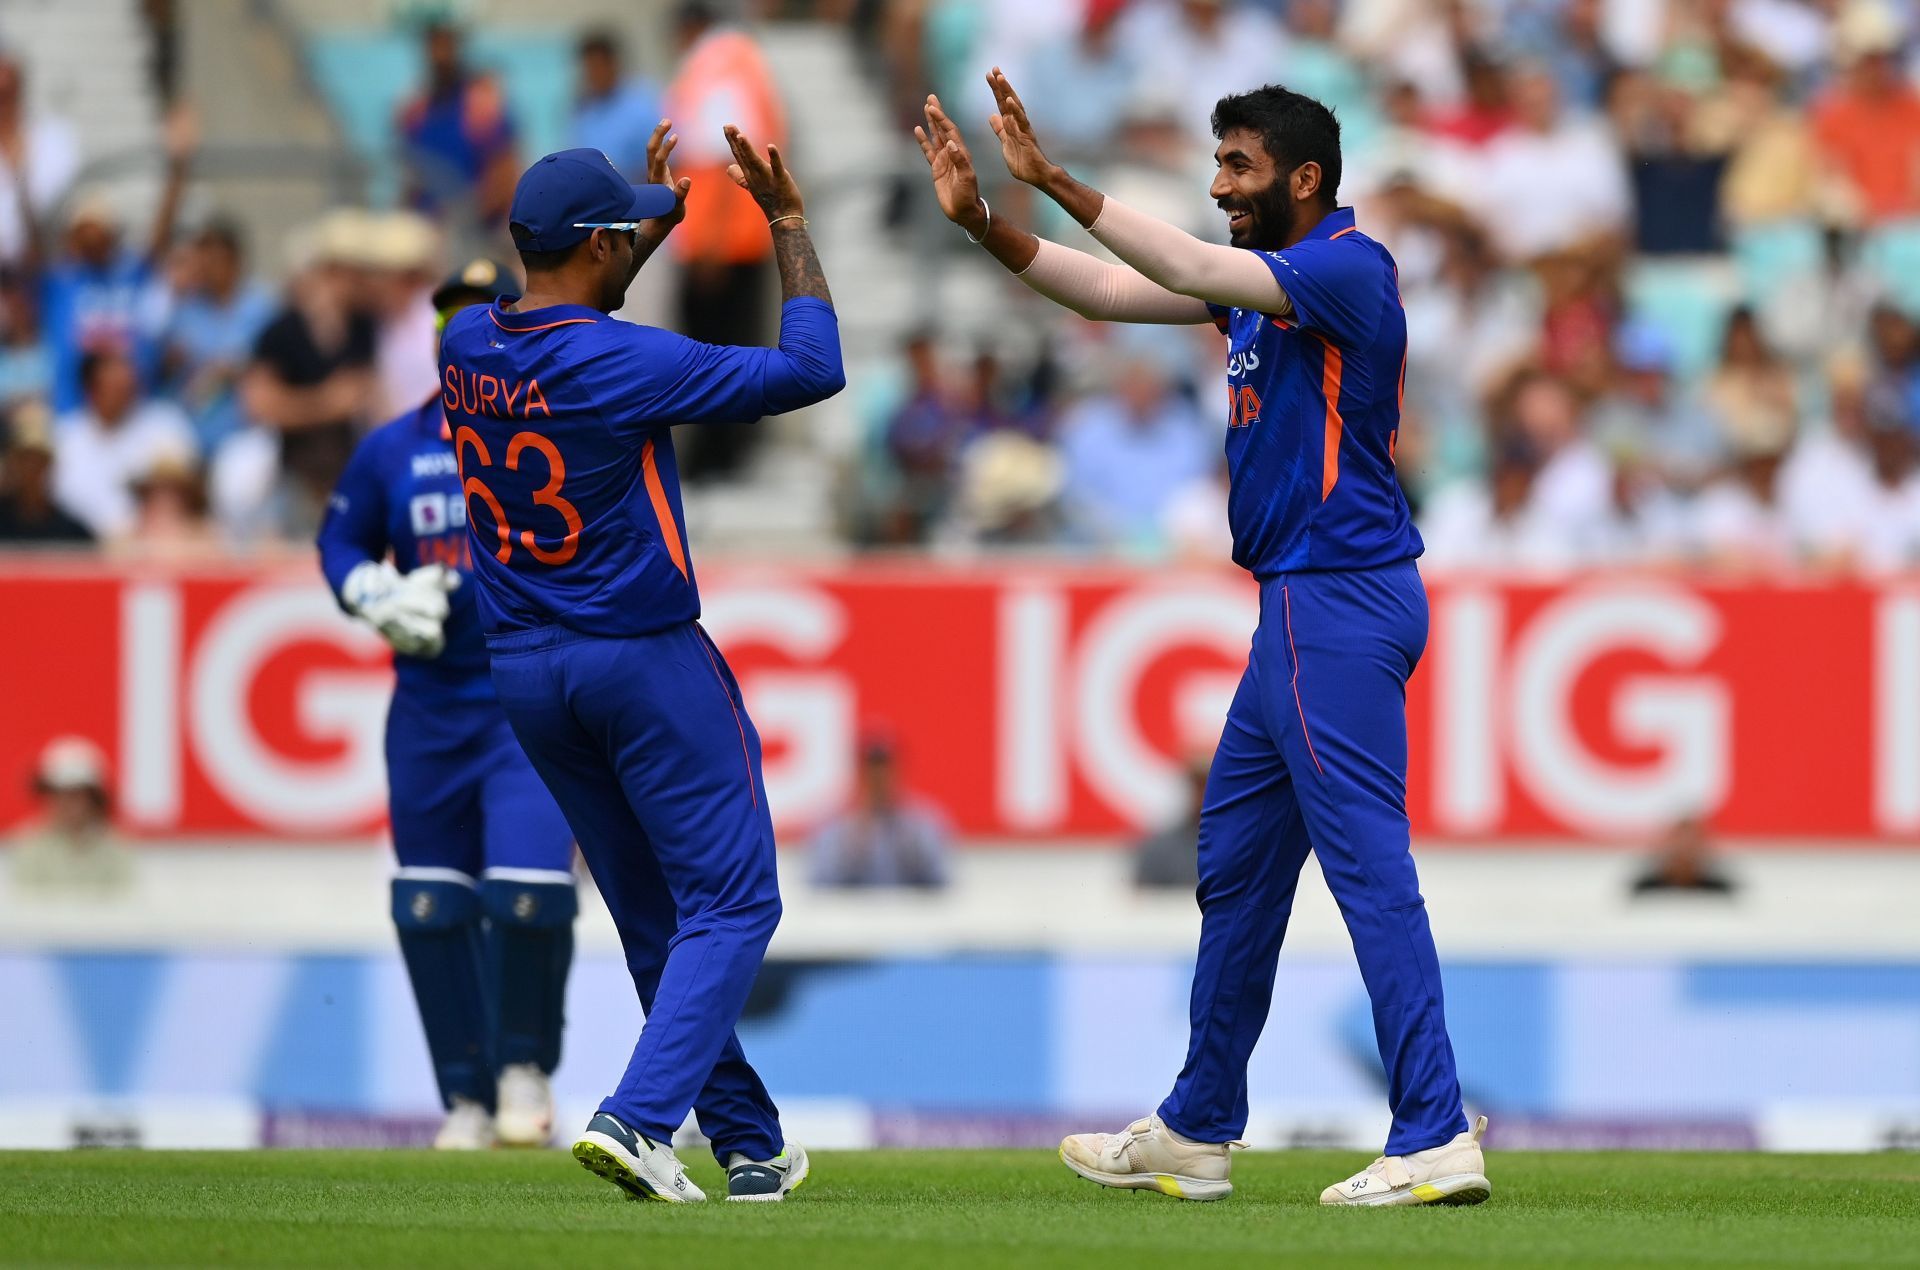 Jasprit Bumrah (right) was the wrecker-in-chief as the Men in Blue thrashed England to take a 1-0 lead in the ODI series.